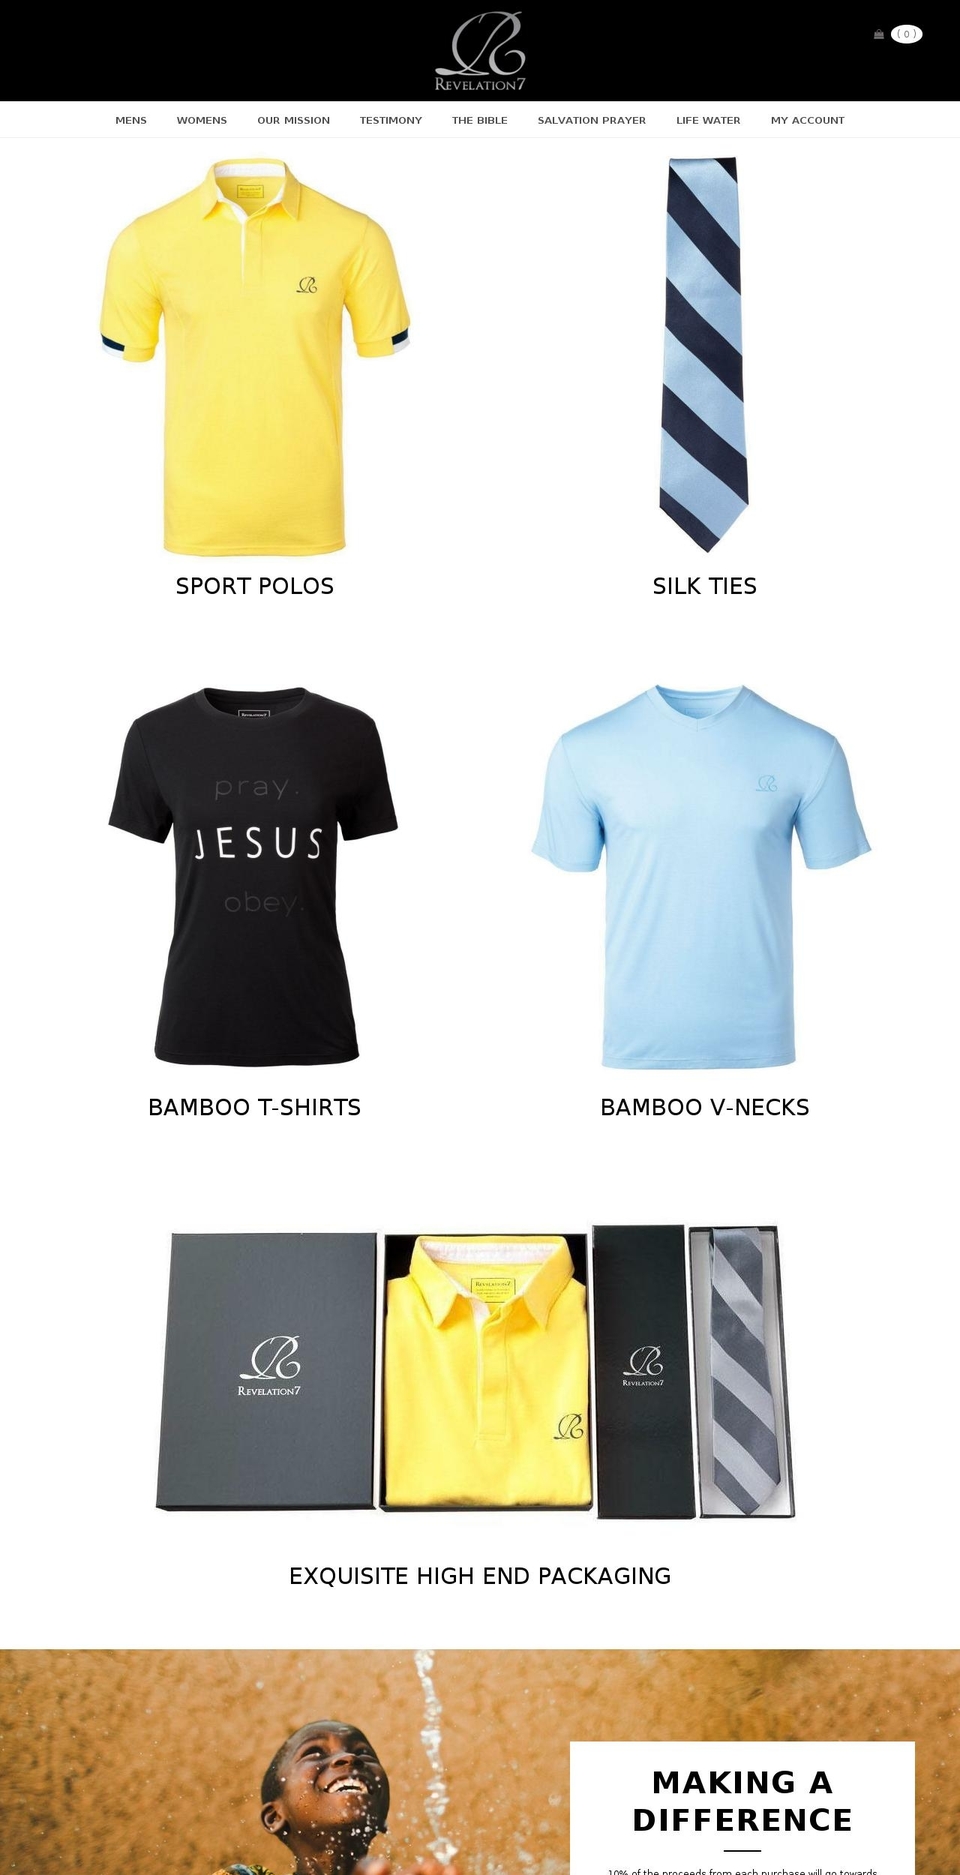 Made With ❤ By Minion Made Shopify theme site example revelation7clothing.com